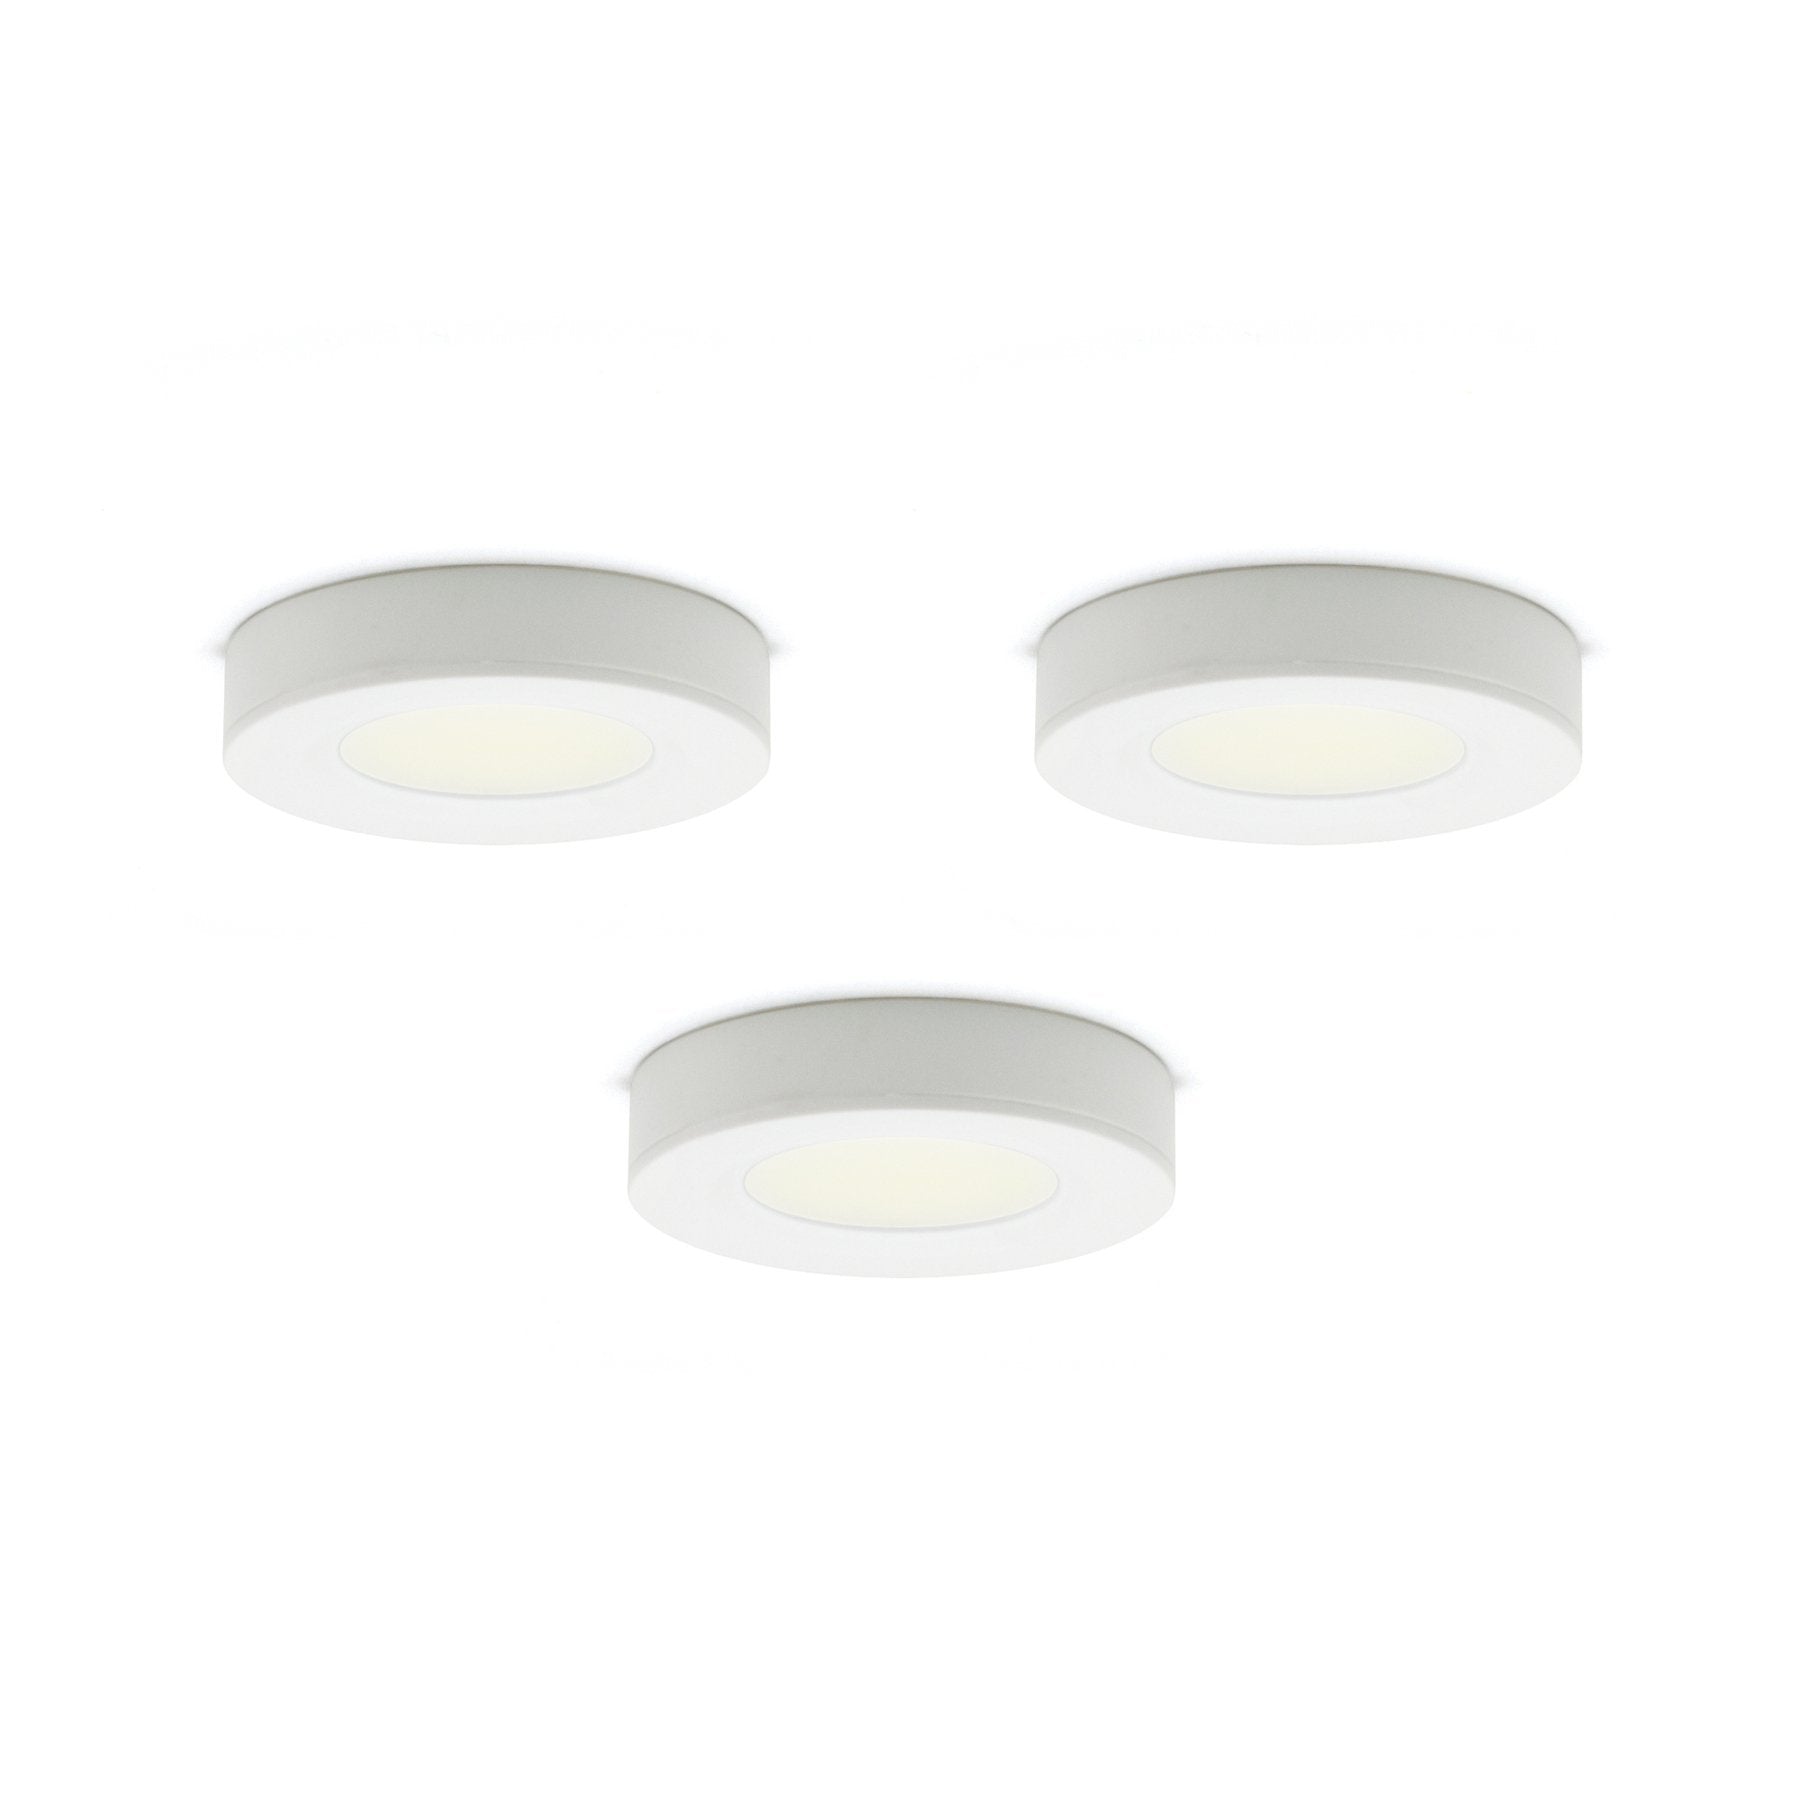 3x1.4W LED Puck Light Kit, 2 in 1 Plastic Puck Lights with Plug-In Driver - White Finish